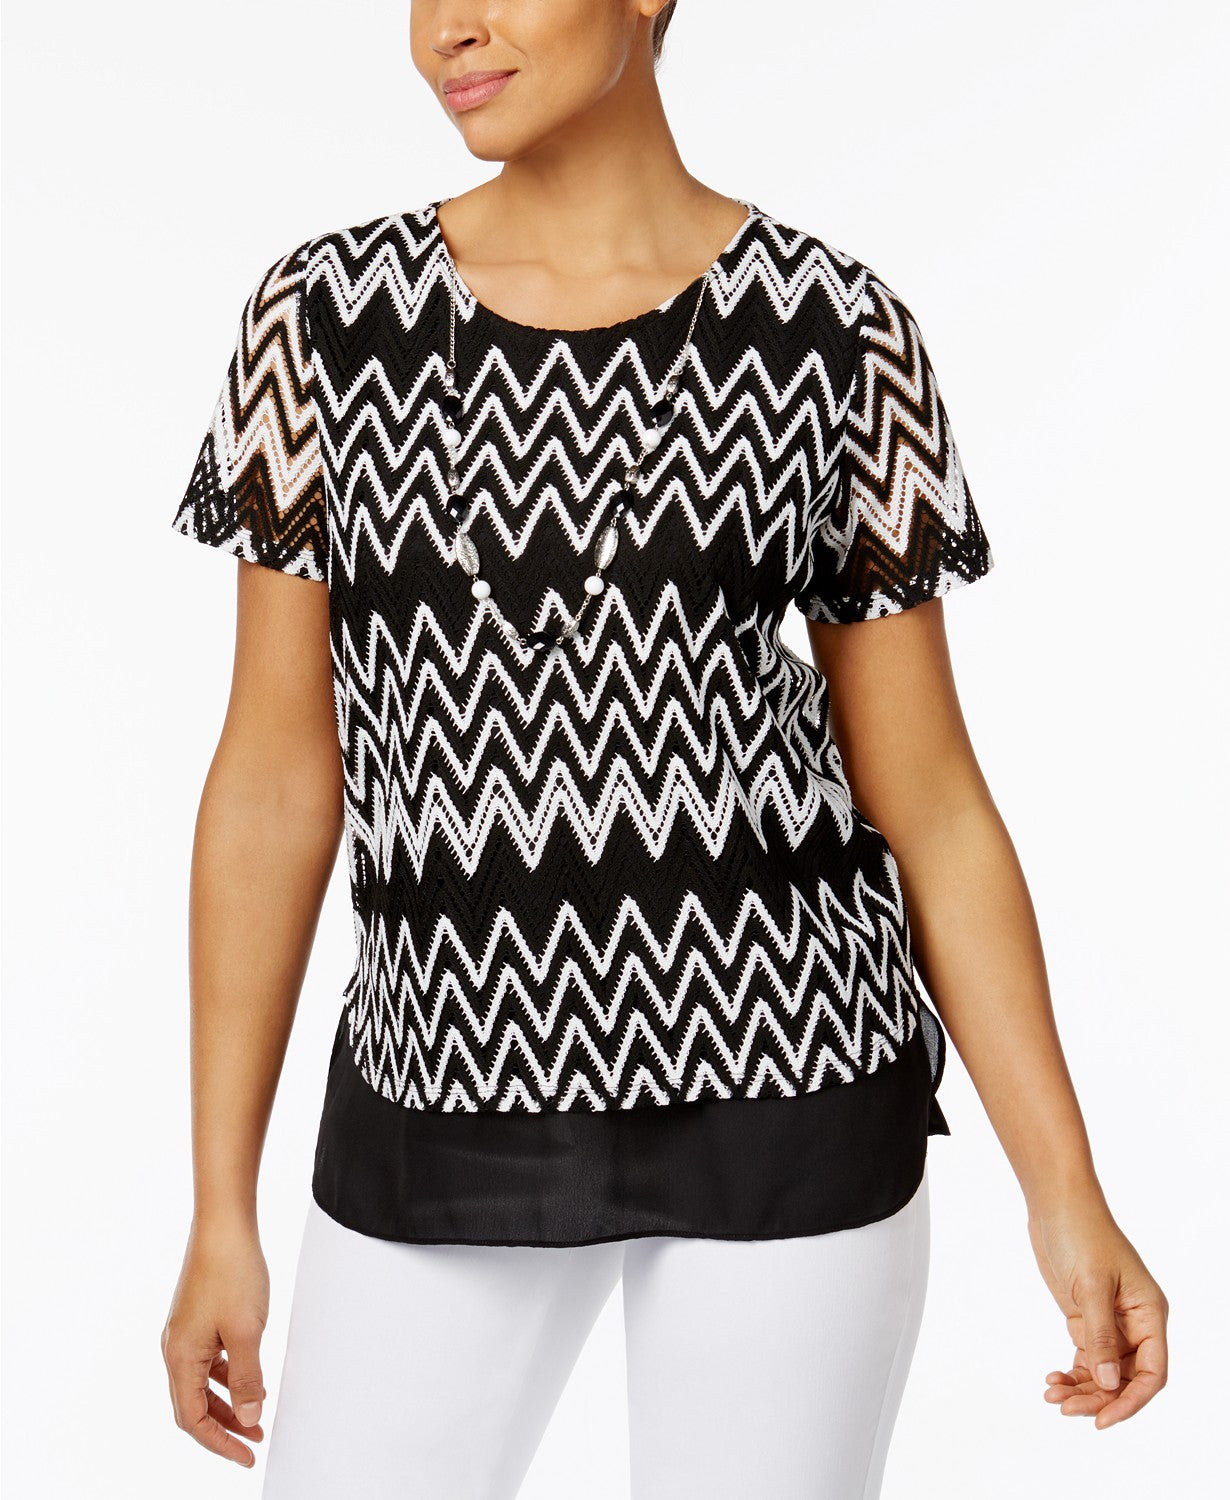 Alfred Dunner Petite Chevron Tiered Top with BlackWhite PS